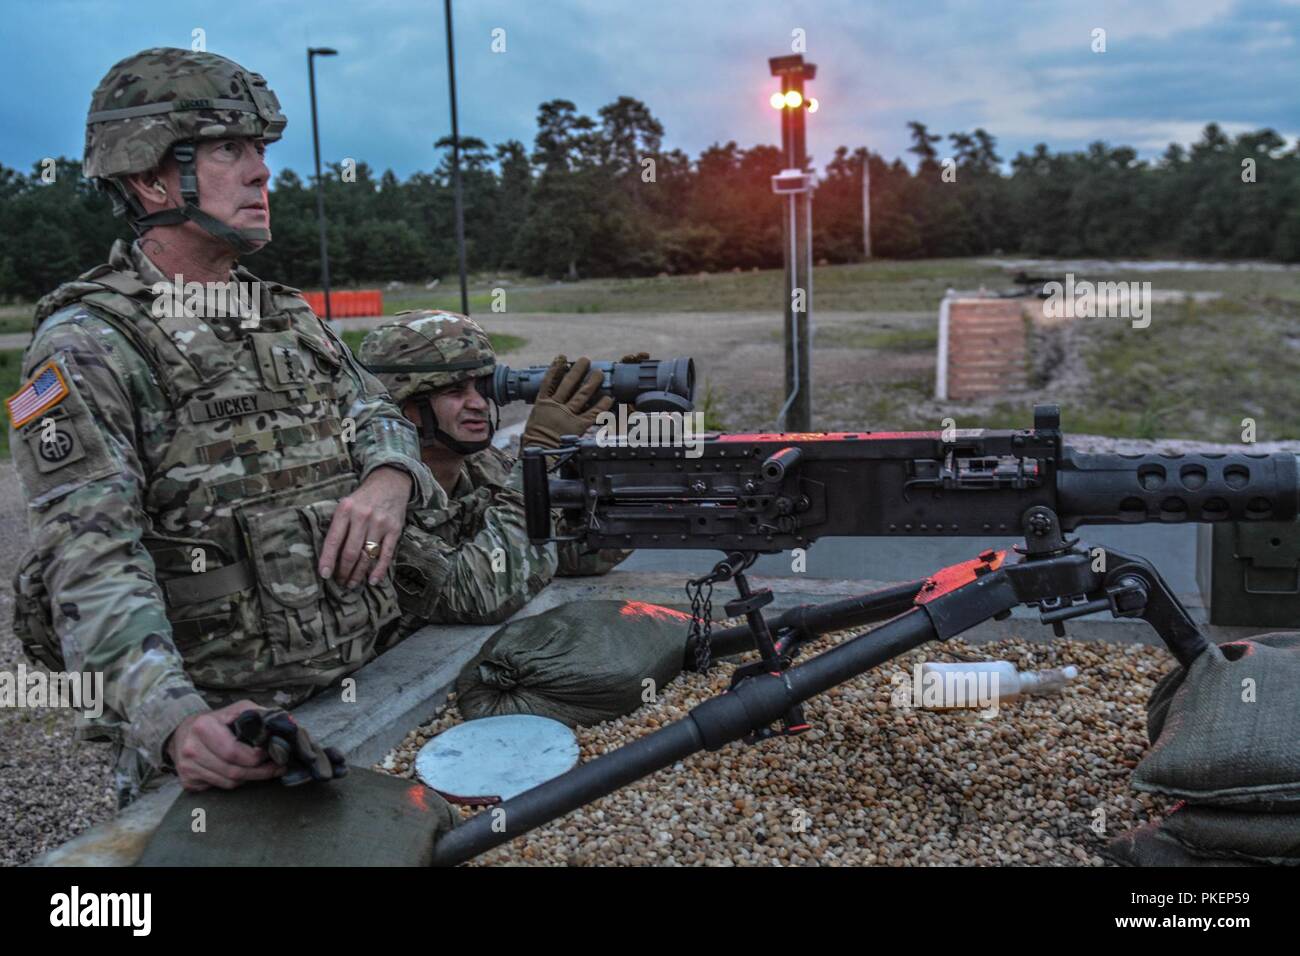 LTG Charles D. Luckey, Chief of Army Reserve and Commanding General, U.S. Army Reserve Command, prepares to fire an M2 machine gun during Task Force Ultimate, Operation Cold Steel II, hosted by U.S. Army Civil Affairs and Psychological Operations Command (Airborne), July 25, 2018 at Joint Base McGuire-Dix-Lakehurst, N.J. Operation Cold Steel is the U.S. Army Reserve's crew-served weapons qualification and validation exercise to ensure America's Army Reserve units and Soldiers are trained and ready to deploy on short notice as part of Ready Force X and bring combat-ready and lethal firepower in Stock Photo